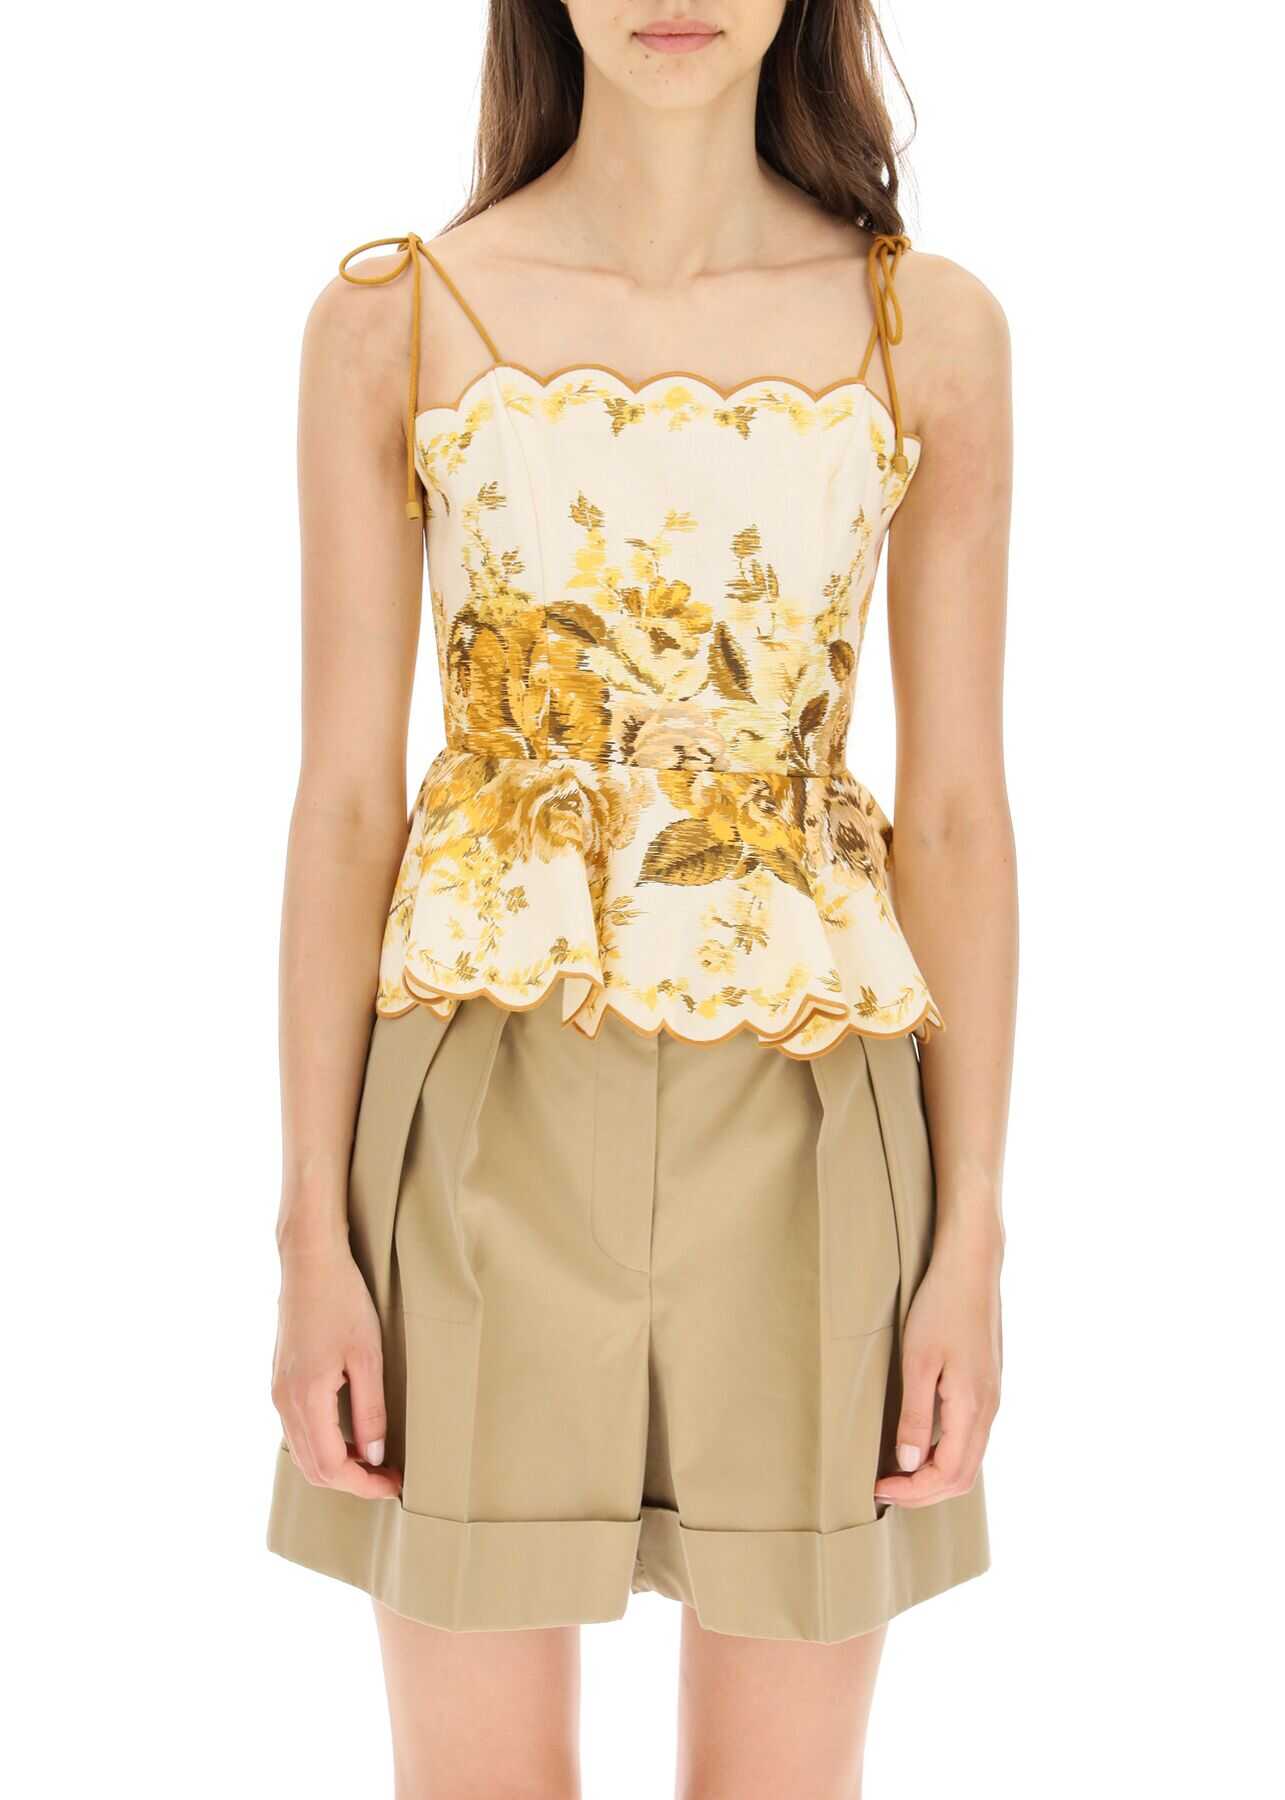 ZIMMERMANN Aliane Amber Floral Scalloped Top 1414TALI AMBER FLORAL